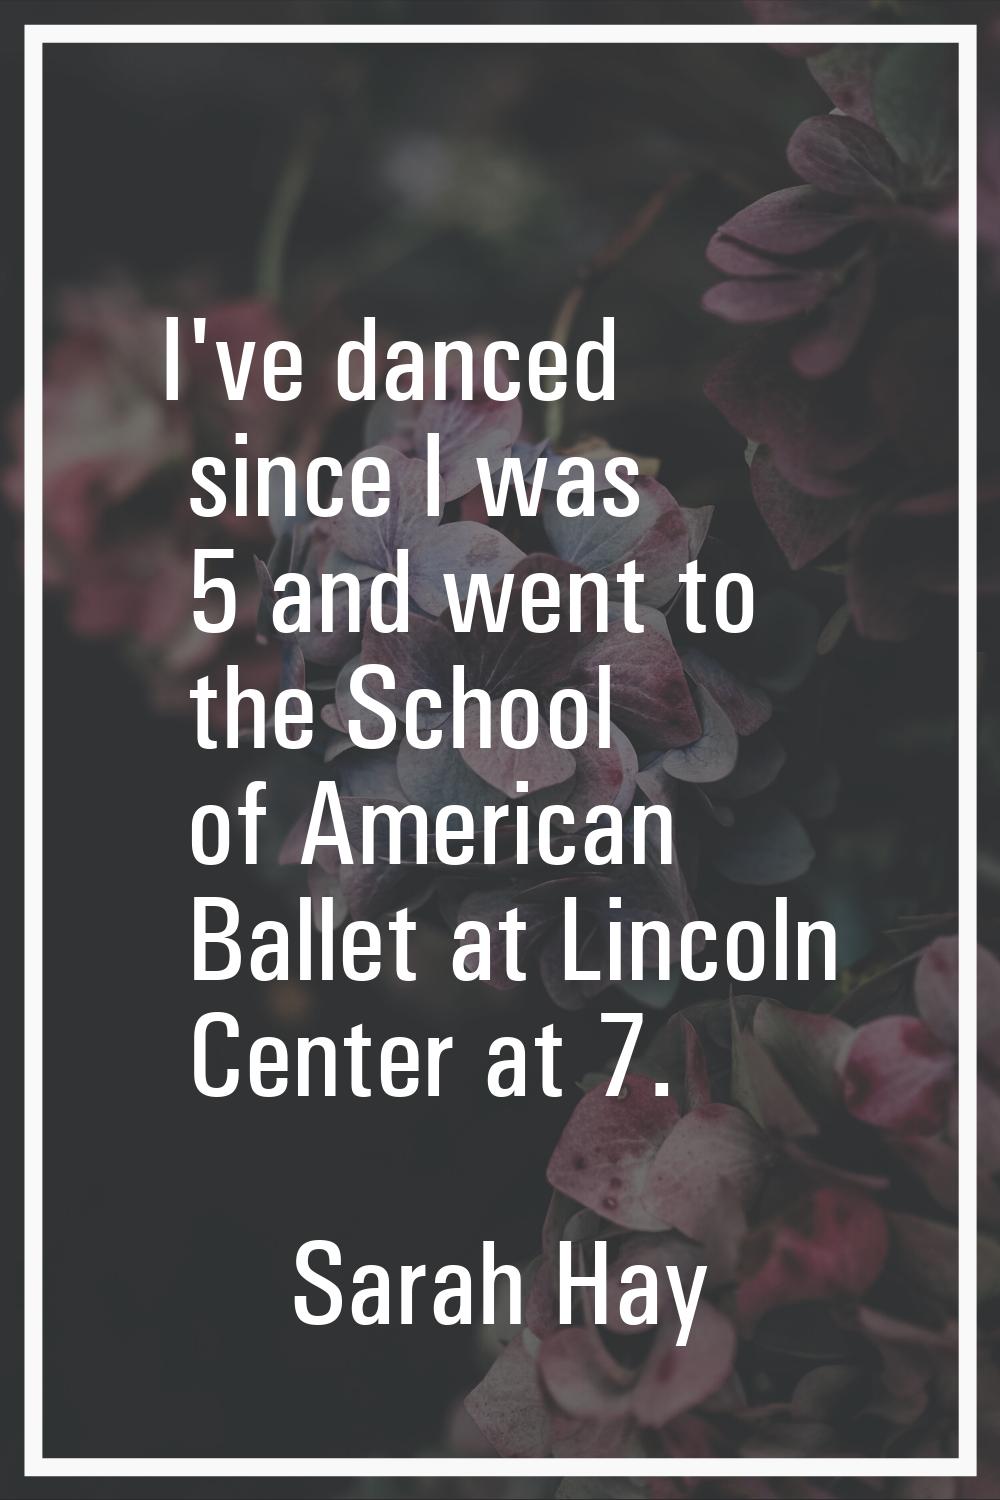 I've danced since I was 5 and went to the School of American Ballet at Lincoln Center at 7.